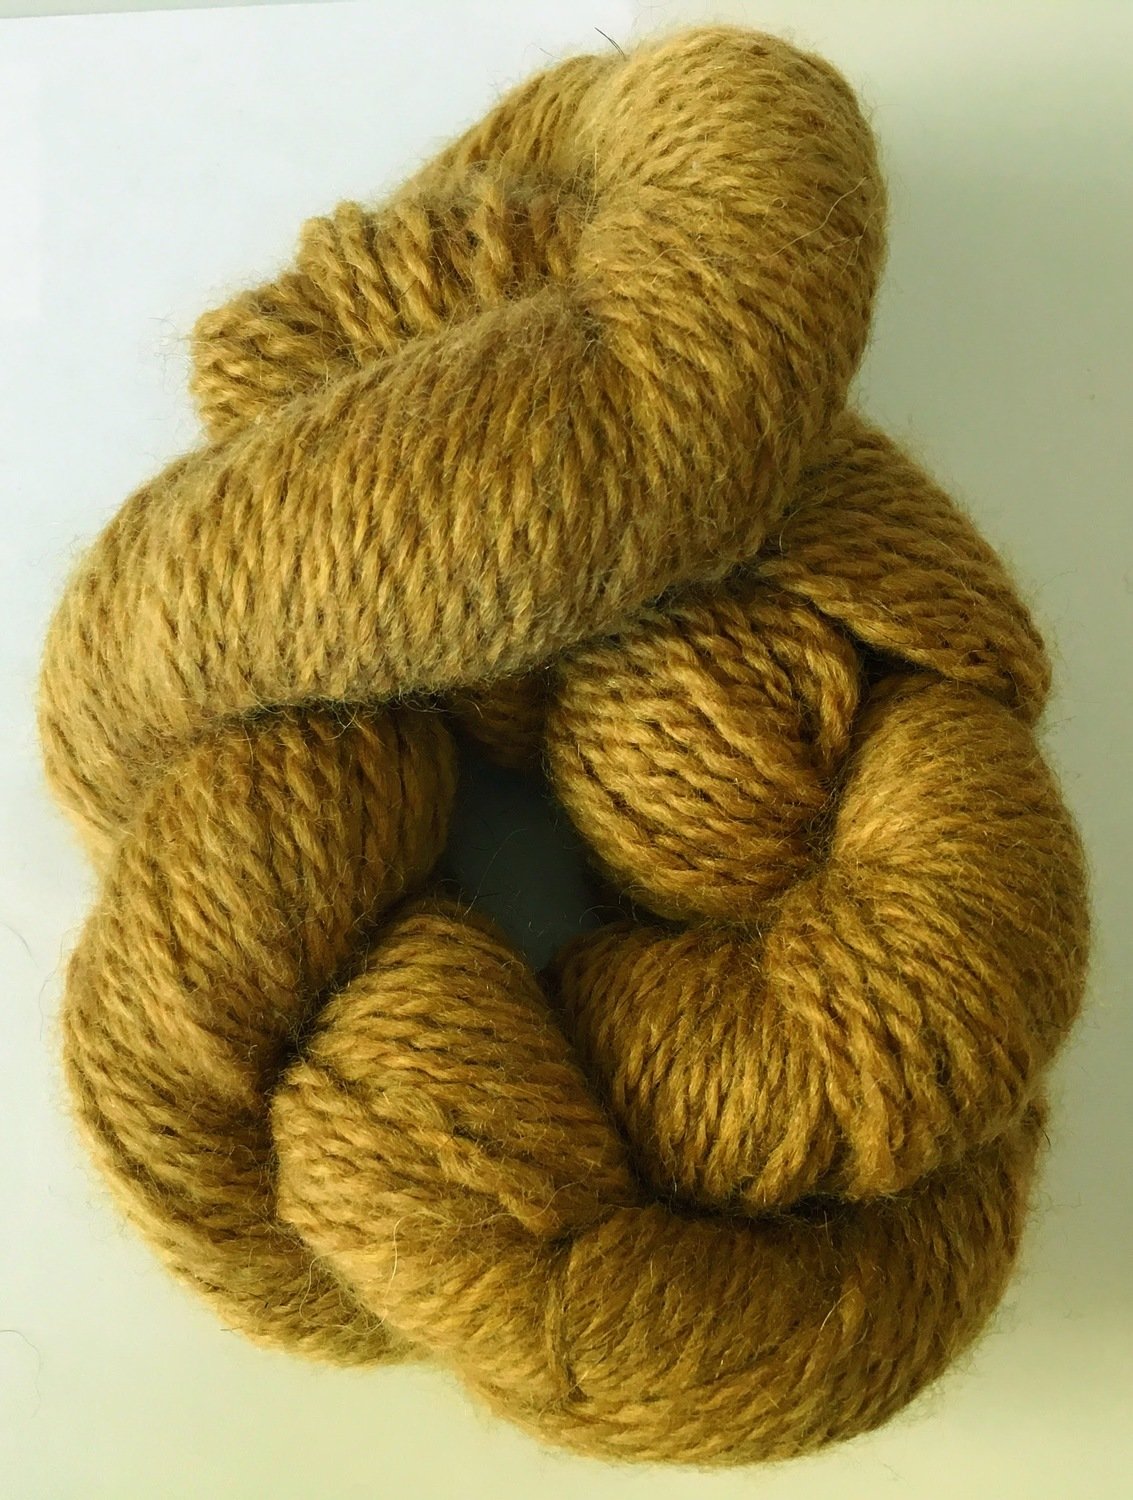 Breezy Hill Cottage-Milled, Hand-Dyed Yarn - Camel